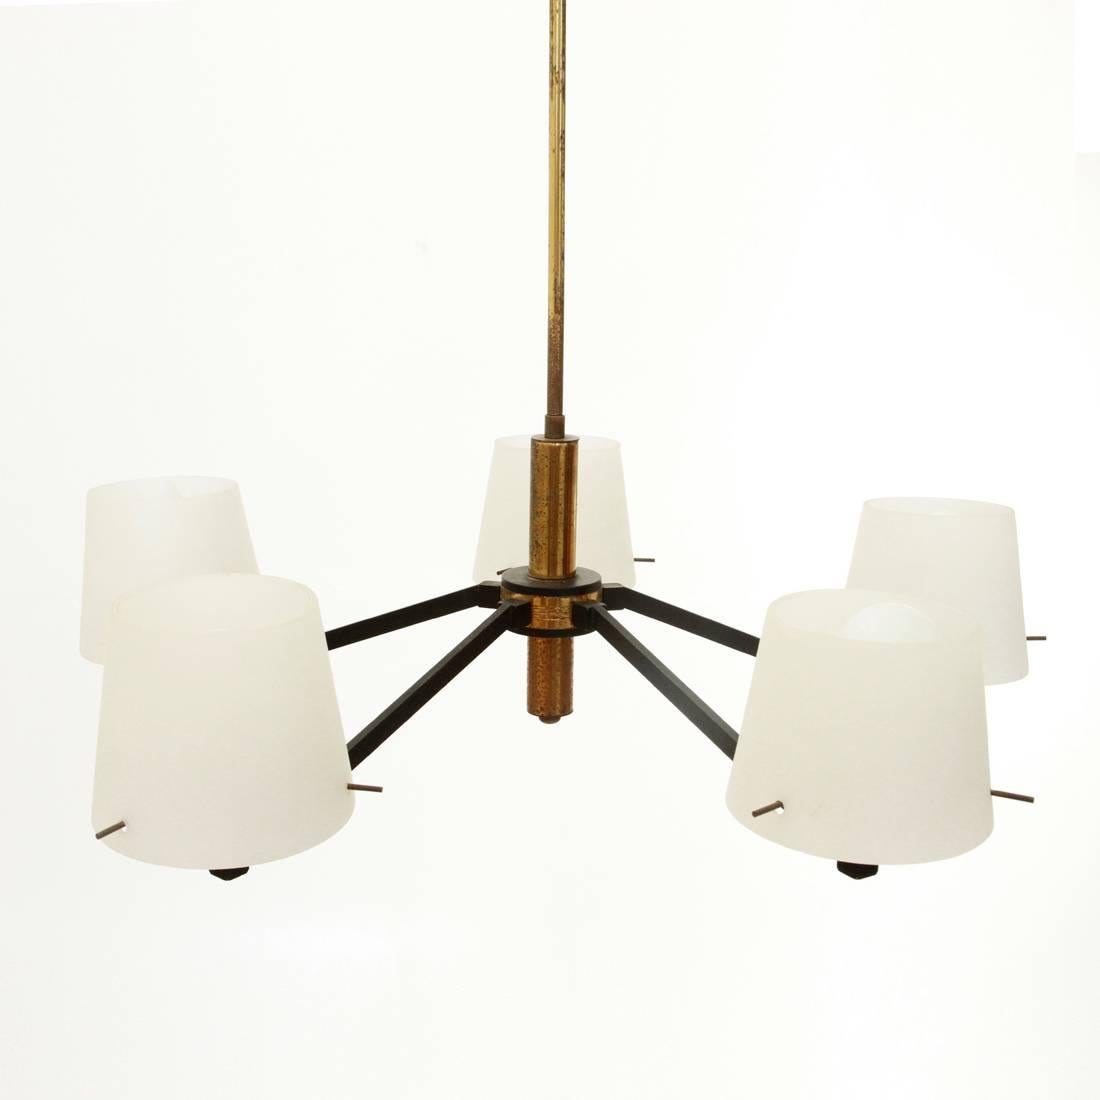 Chandelier produced in Italy in the 1950s.
Black painted metal and brass frame, five arms.
Diffusers in white opaline glass.
Good conditions.

Dimensions: Diameter 61 cm, height 85 cm.